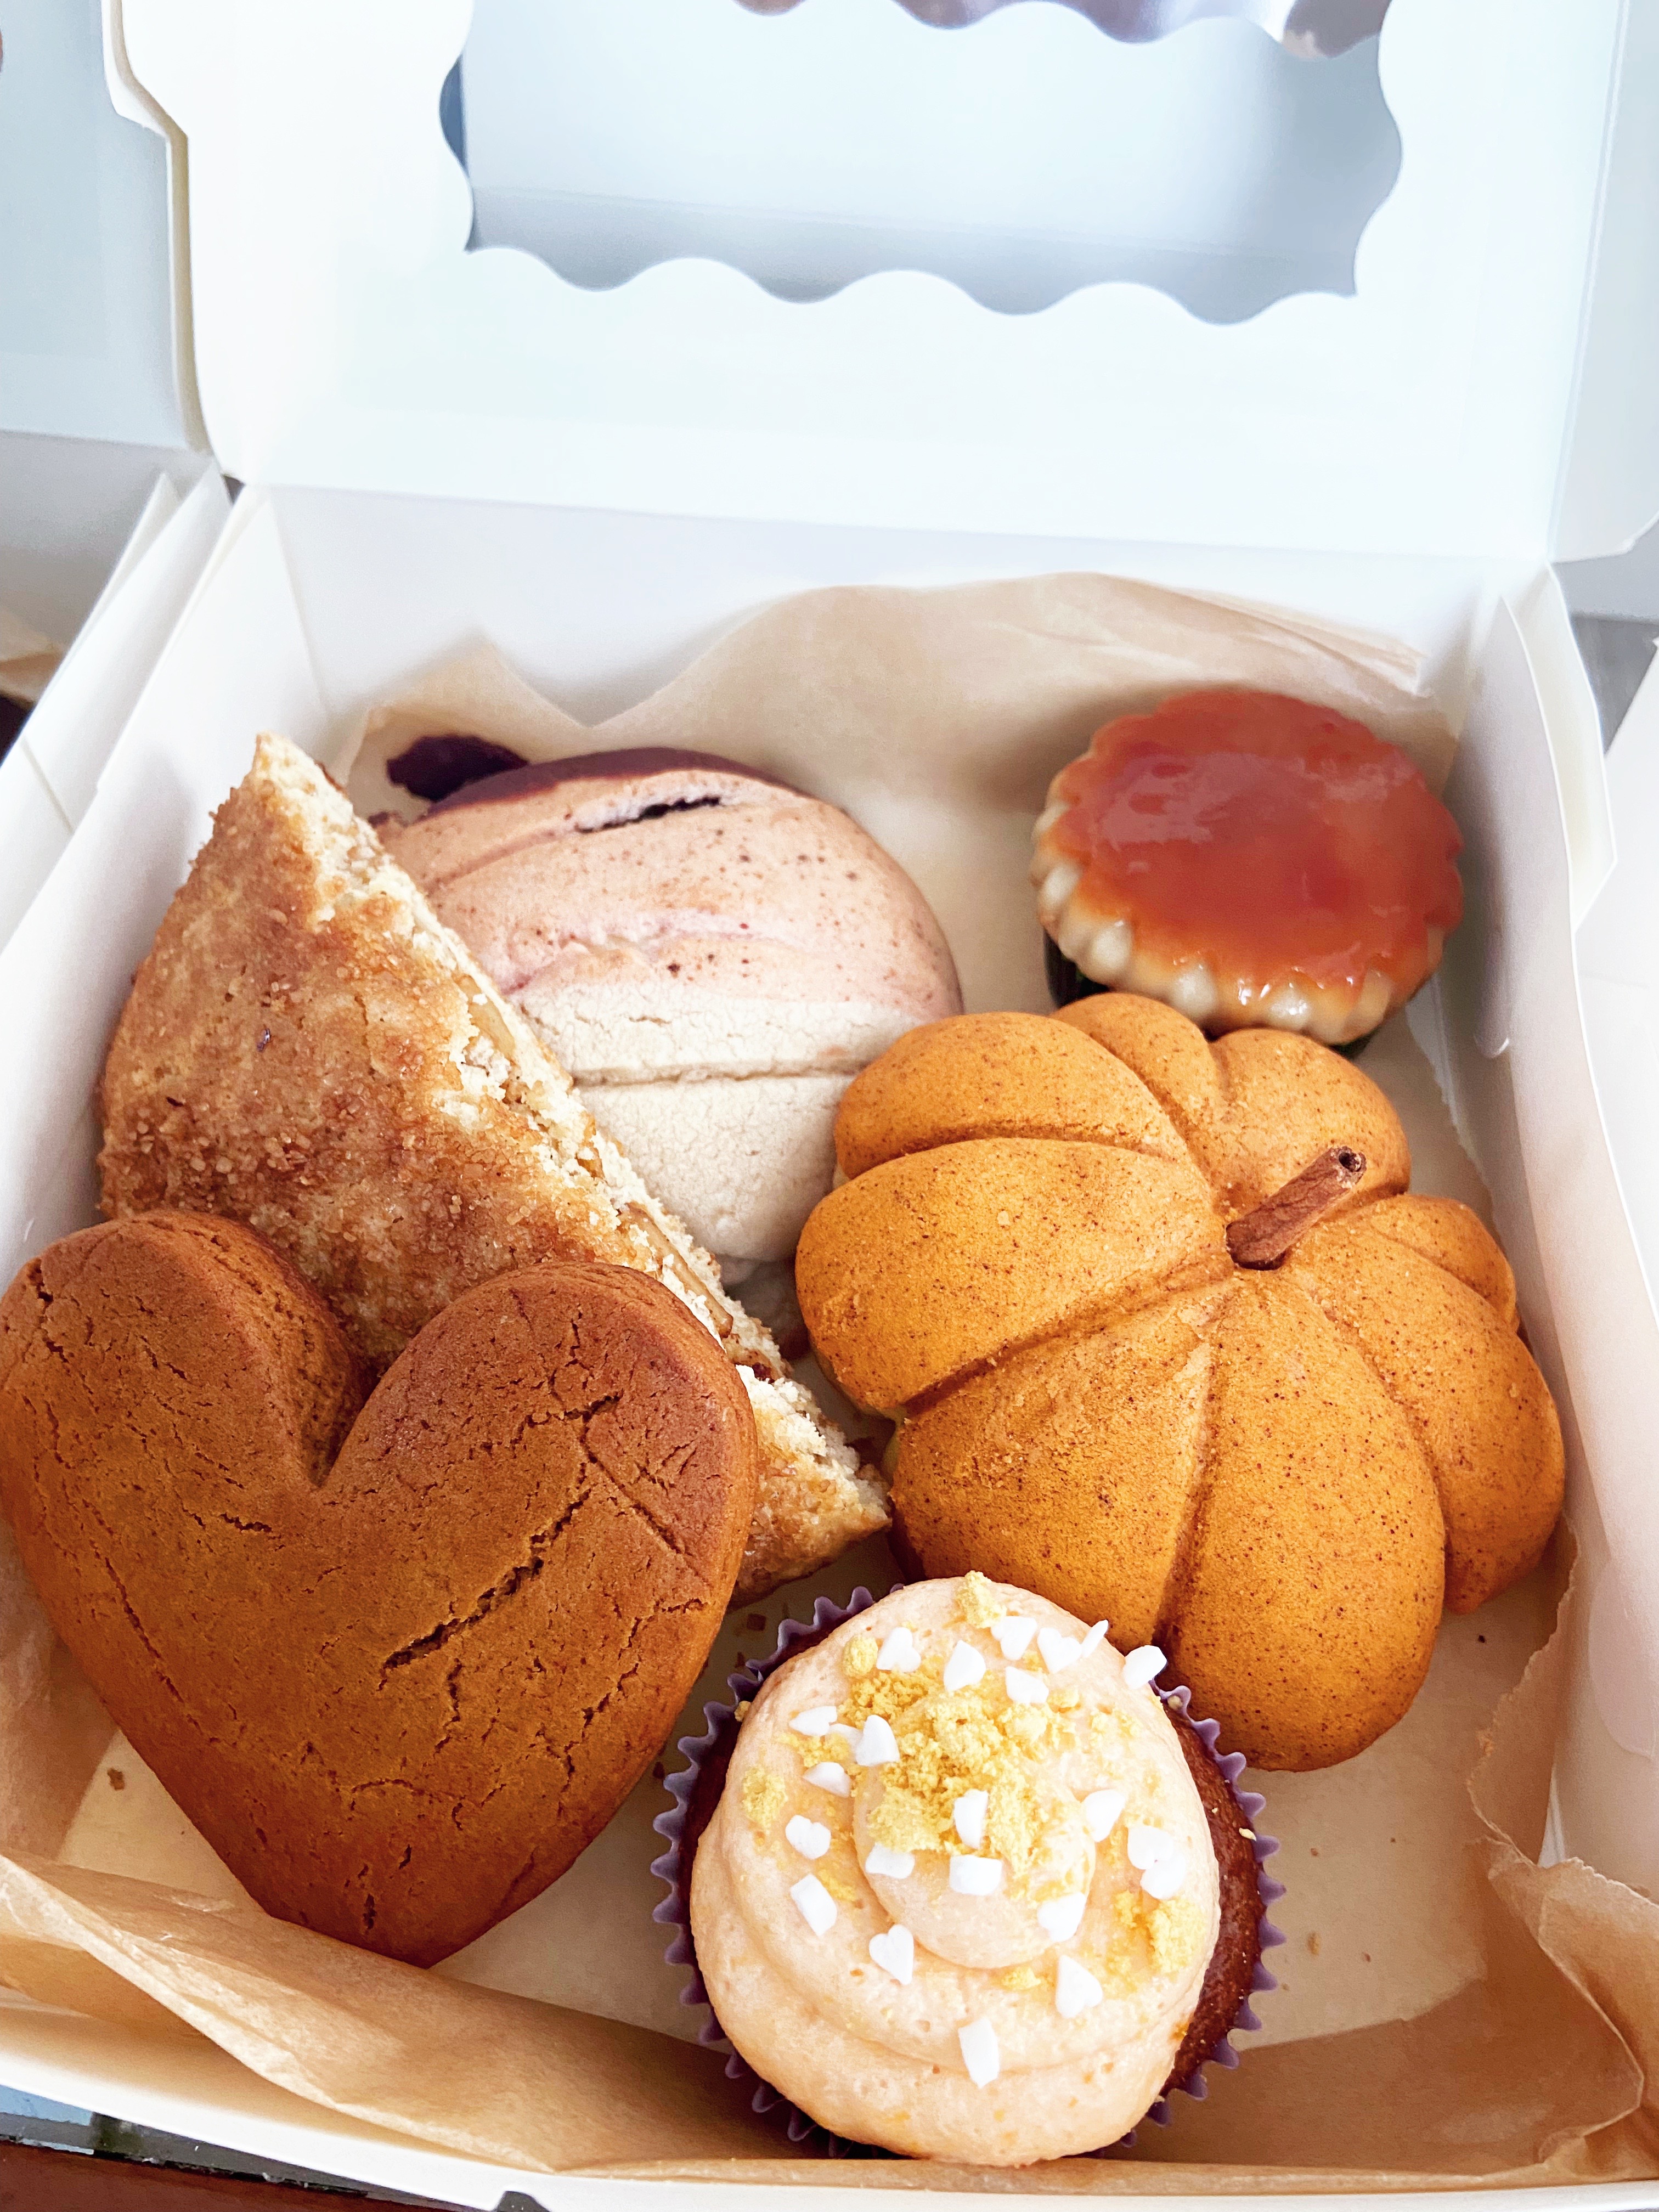 a box of assorted baked goods